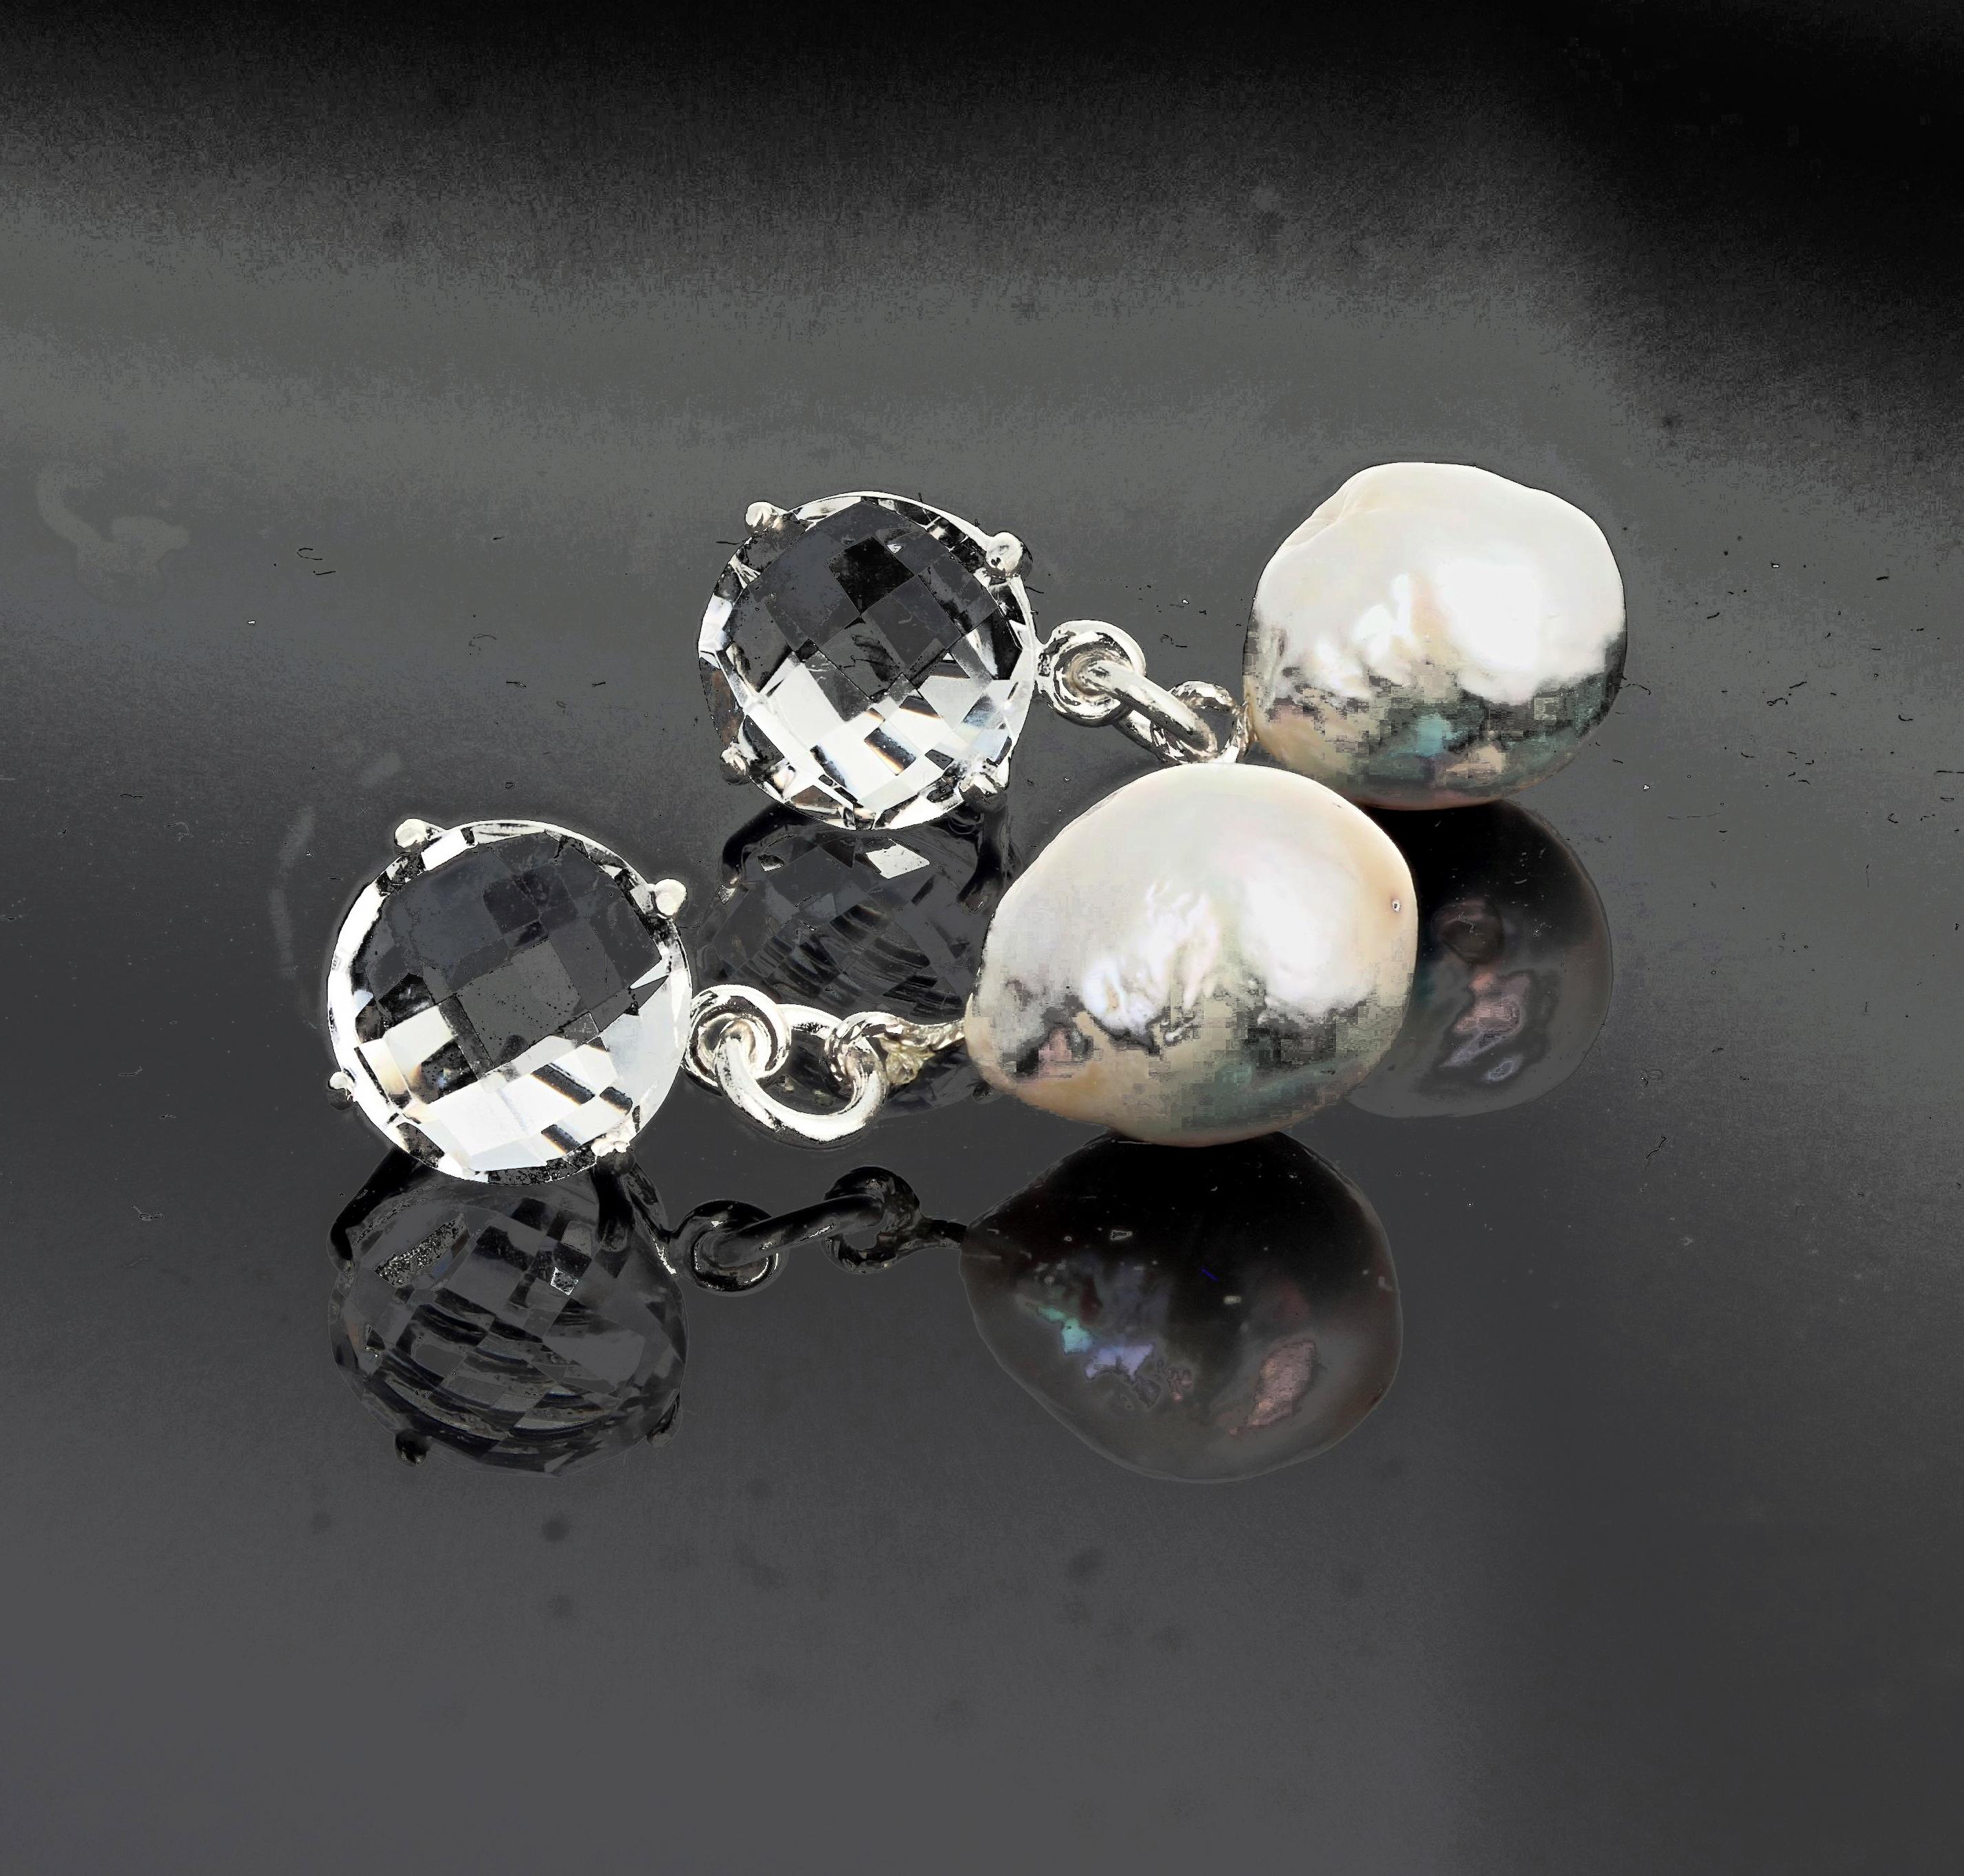 These 5.4 carats of checkerboard gem cut brilliant white translucent Quartz (10 mm) dangle beautiful white shiny cultured ocean Pearls set in sterling silver stud earrings.  They hang approximately 1.32 inches long.  M